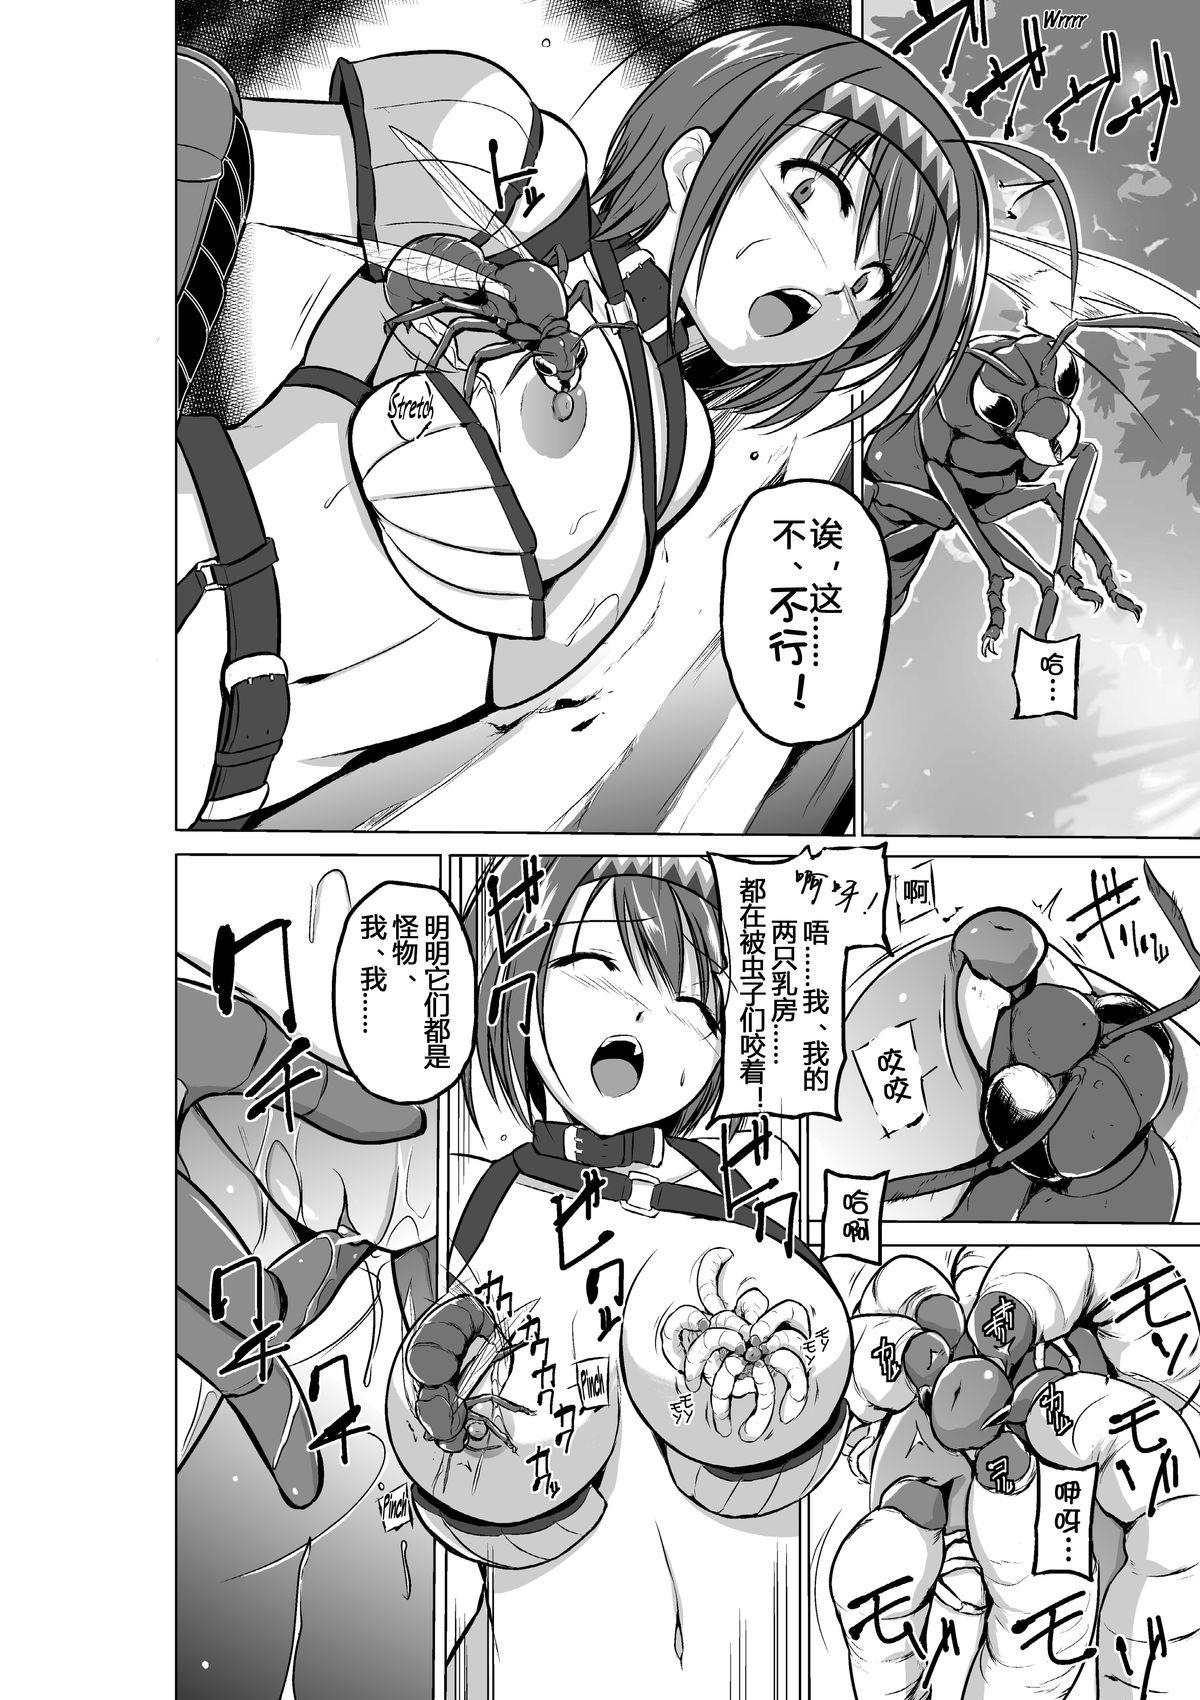 Pene Dungeon Travelers - Chie no Himegoto - Toheart2 Tight Cunt - Page 8